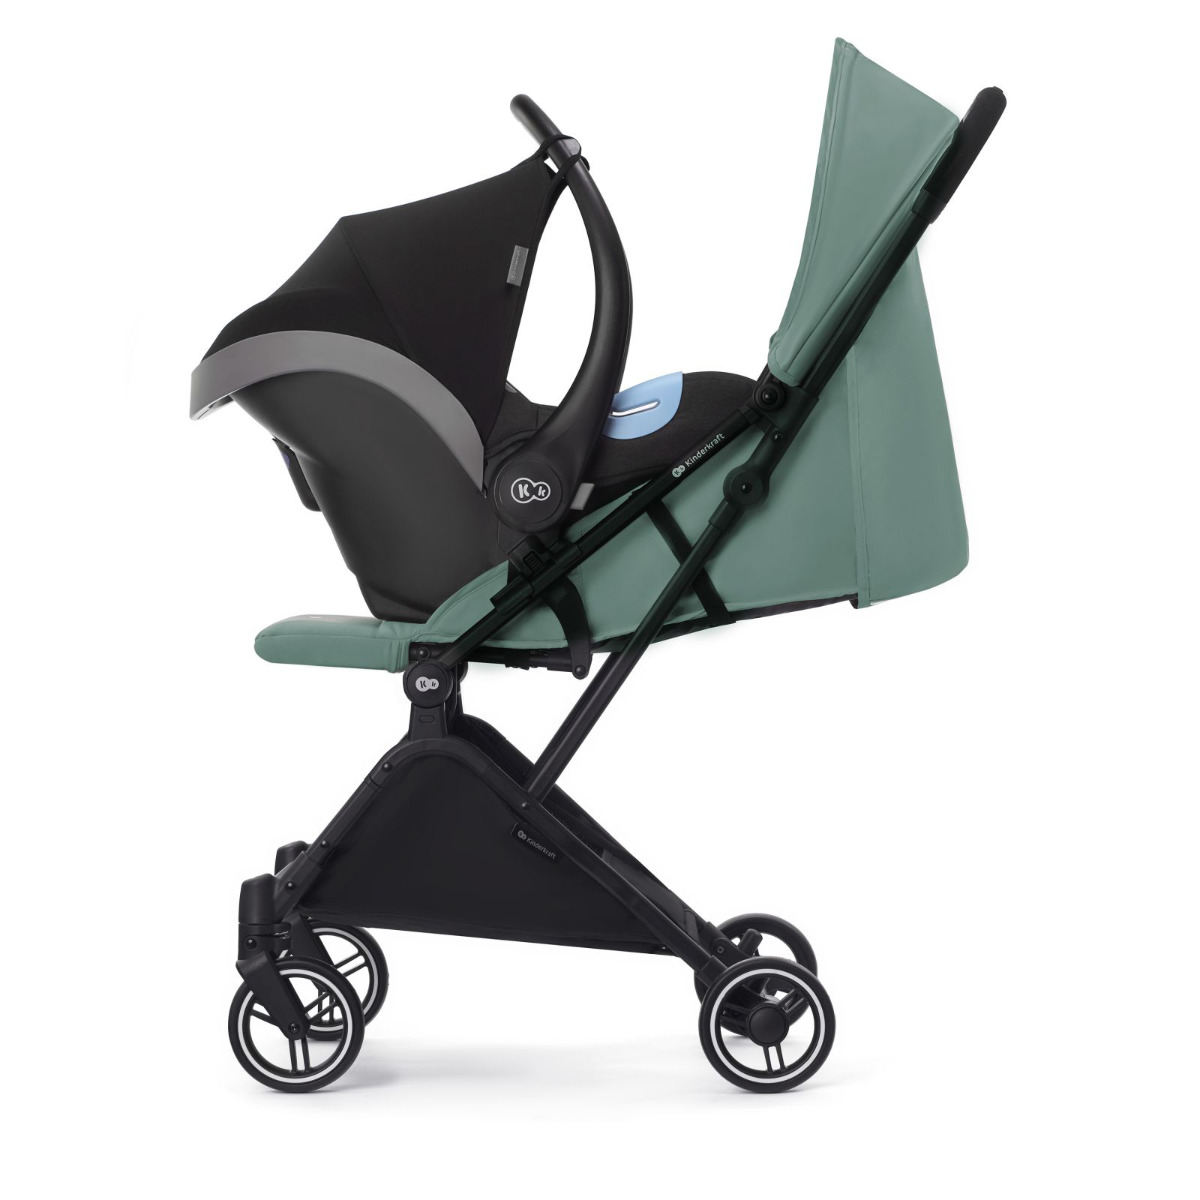 Compact Stroller INDY 2